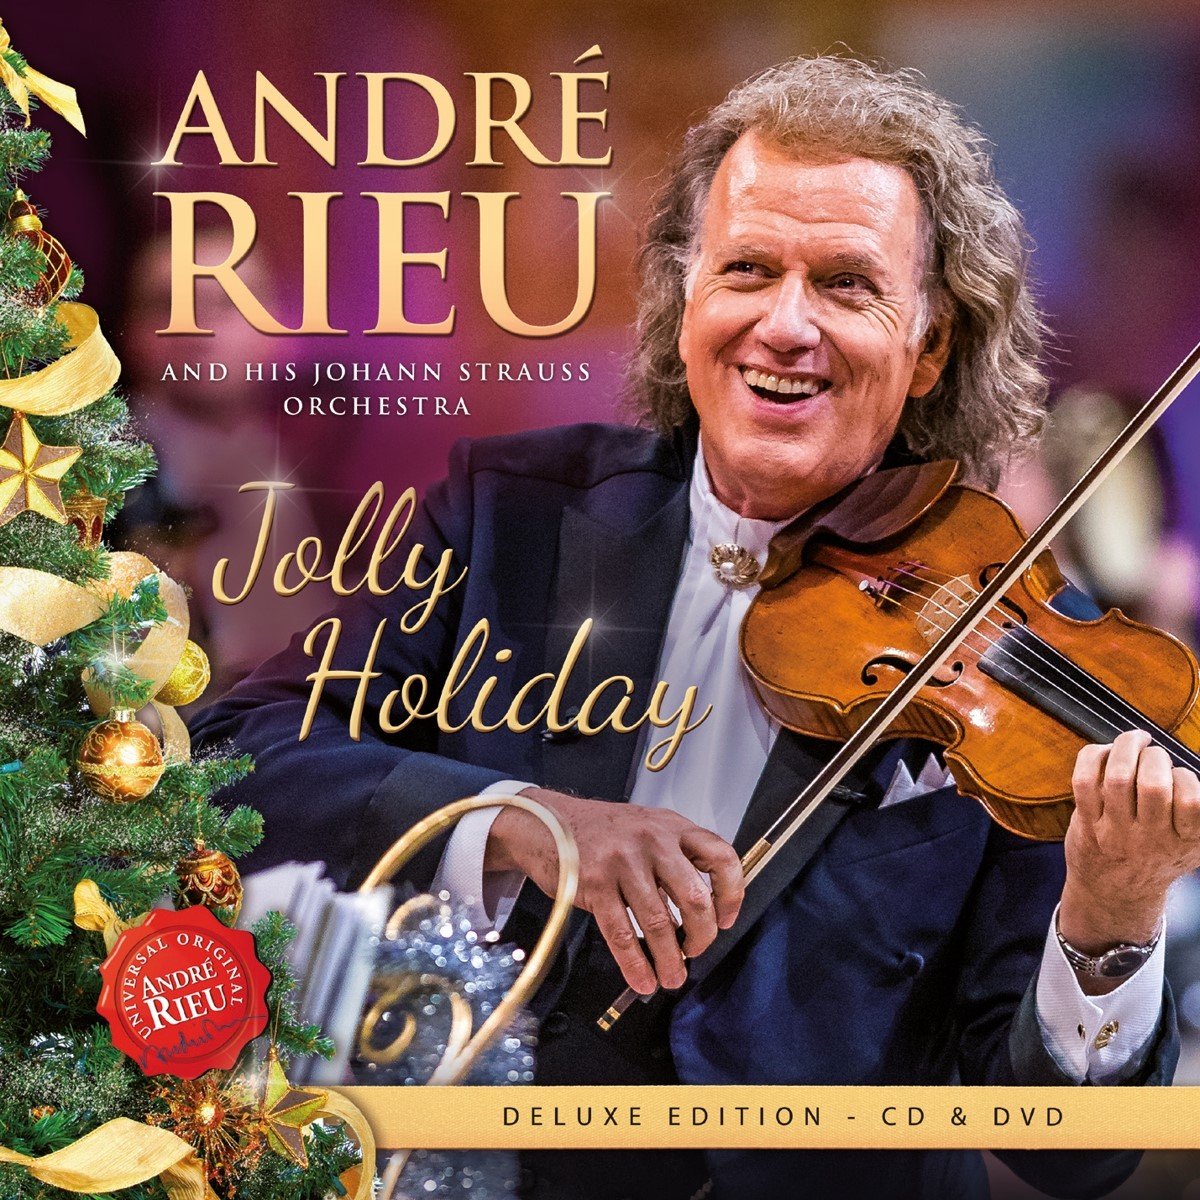 André Rieu & Johann Strauss Orchestra - Strauss: Jolly Holiday (CD | DVD) (Deluxe Edition) - André Rieu & Johann Strauss Orchestra